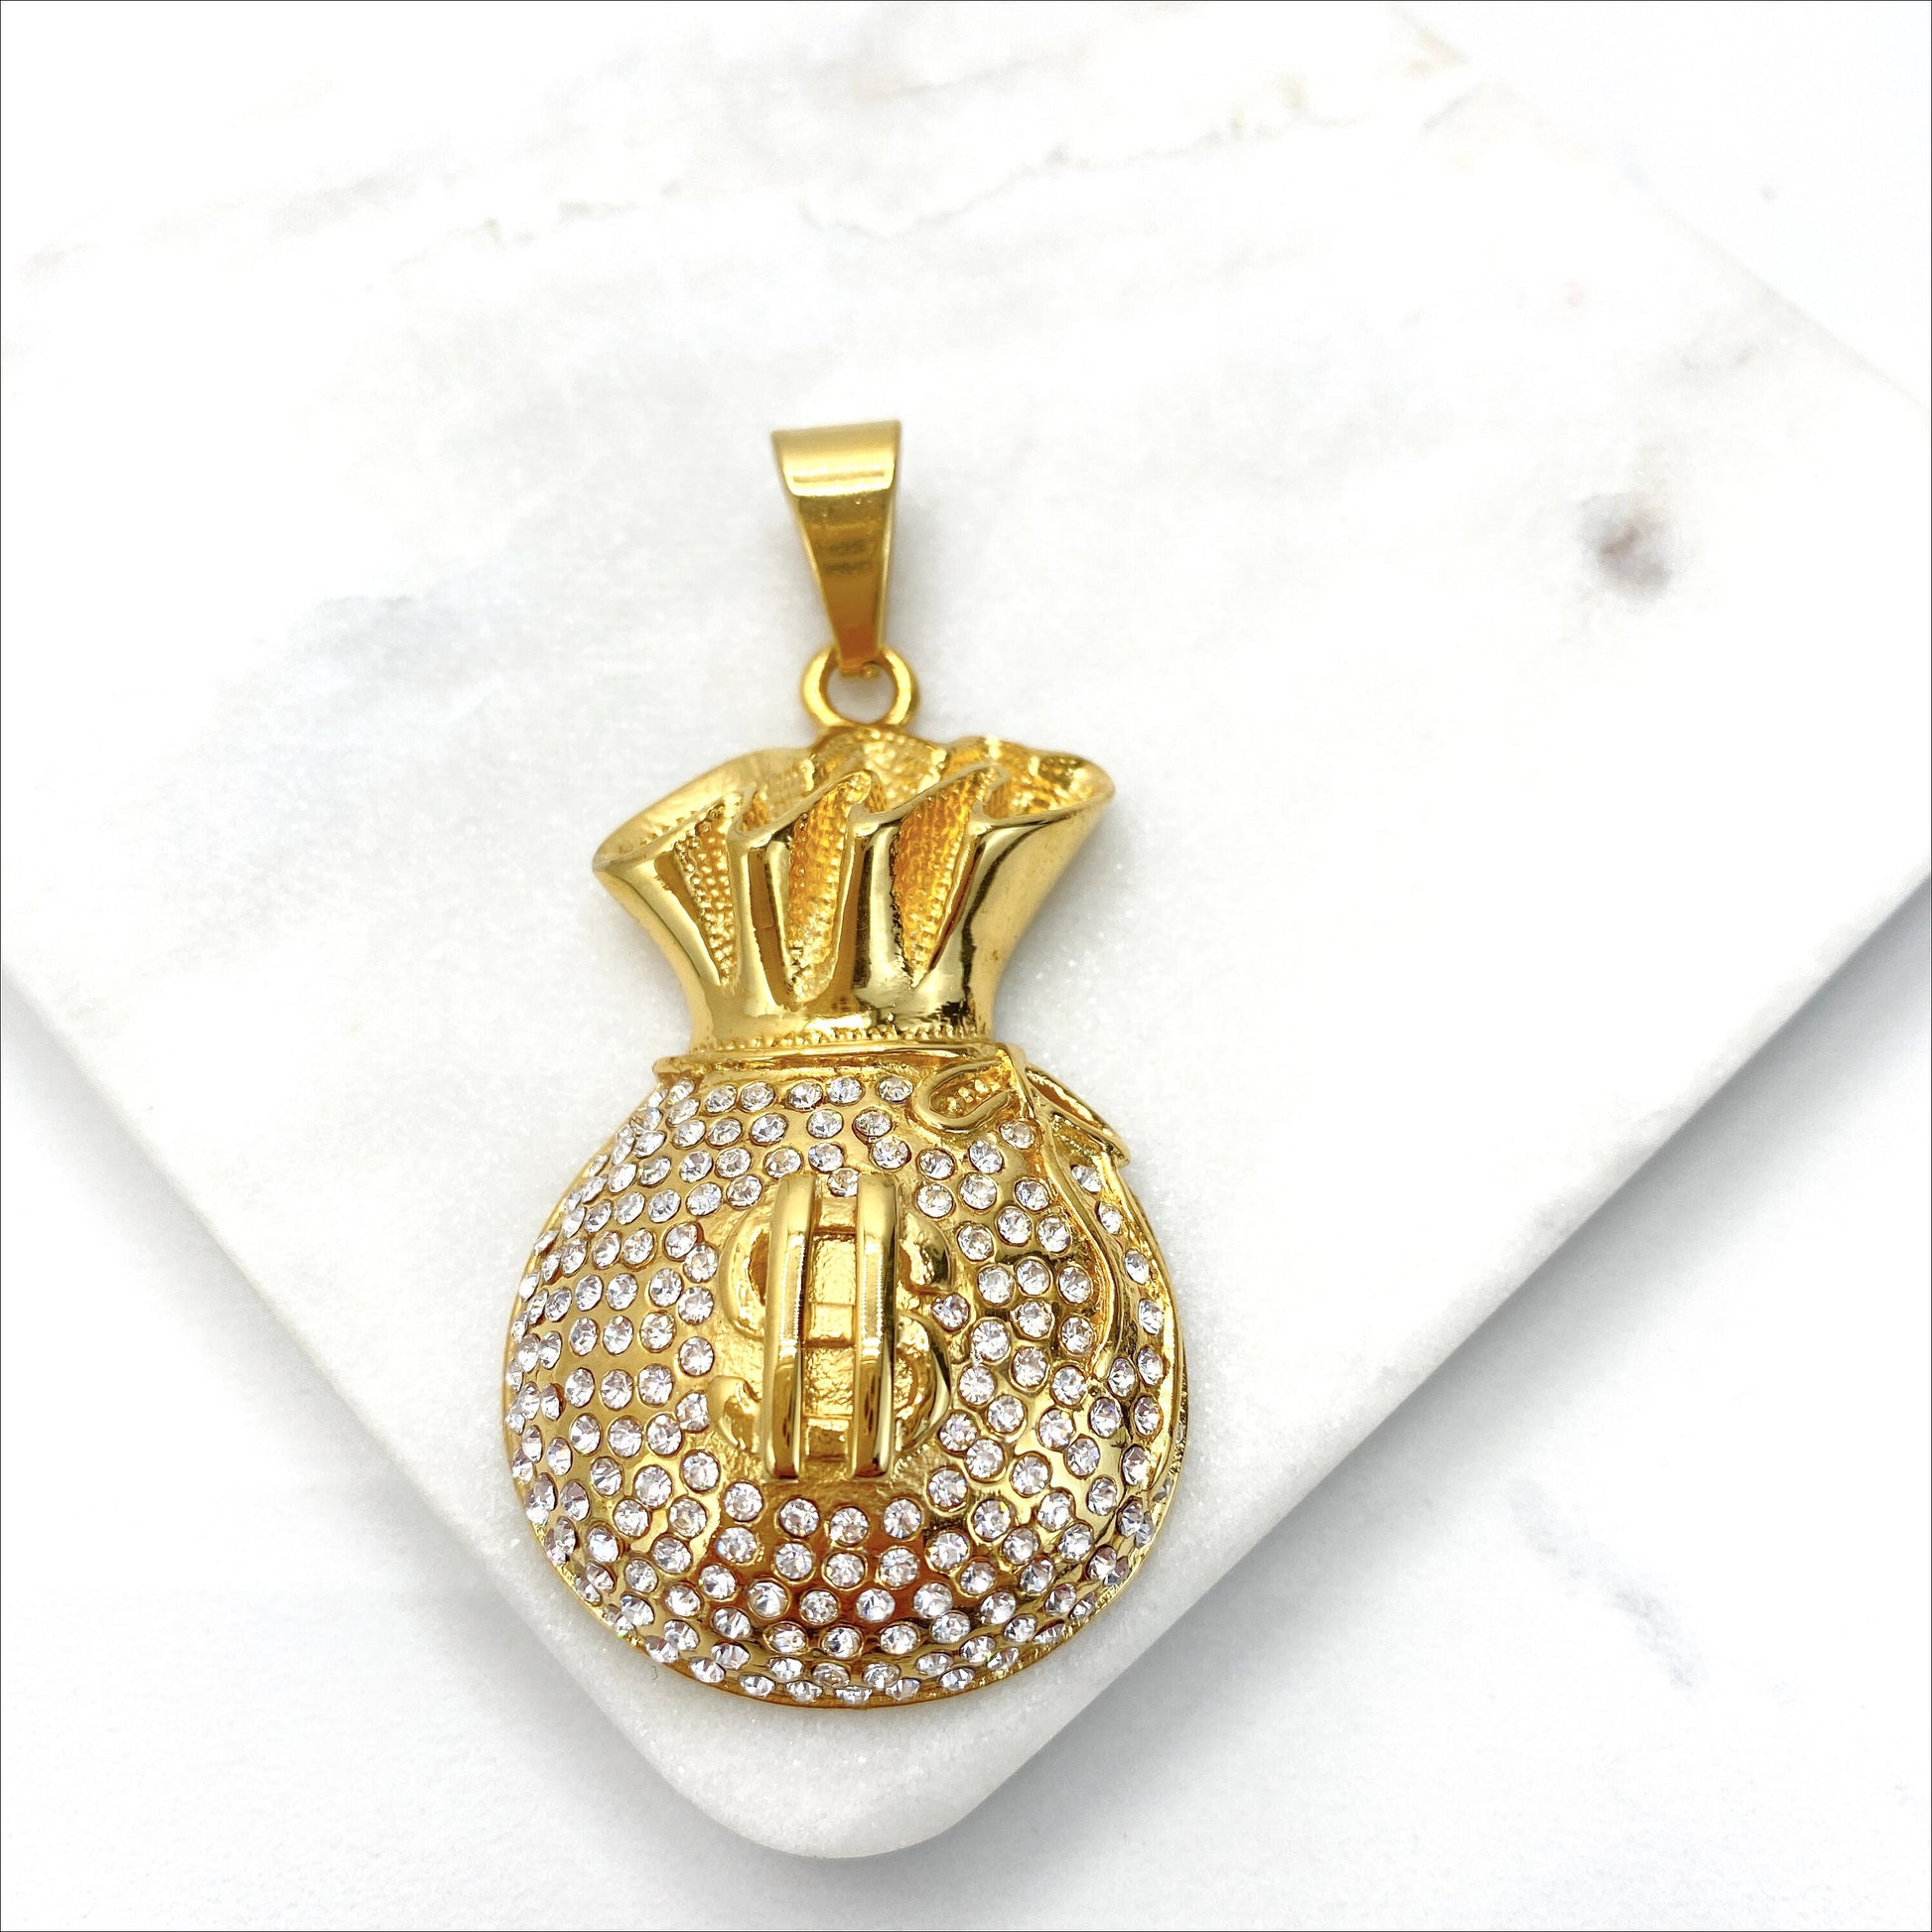 Stainless Steal, Cubic Zirconia ''Bag of Money'' Charms Pendant, Gold or Silver, Wholesale Jewelry Making Supplies